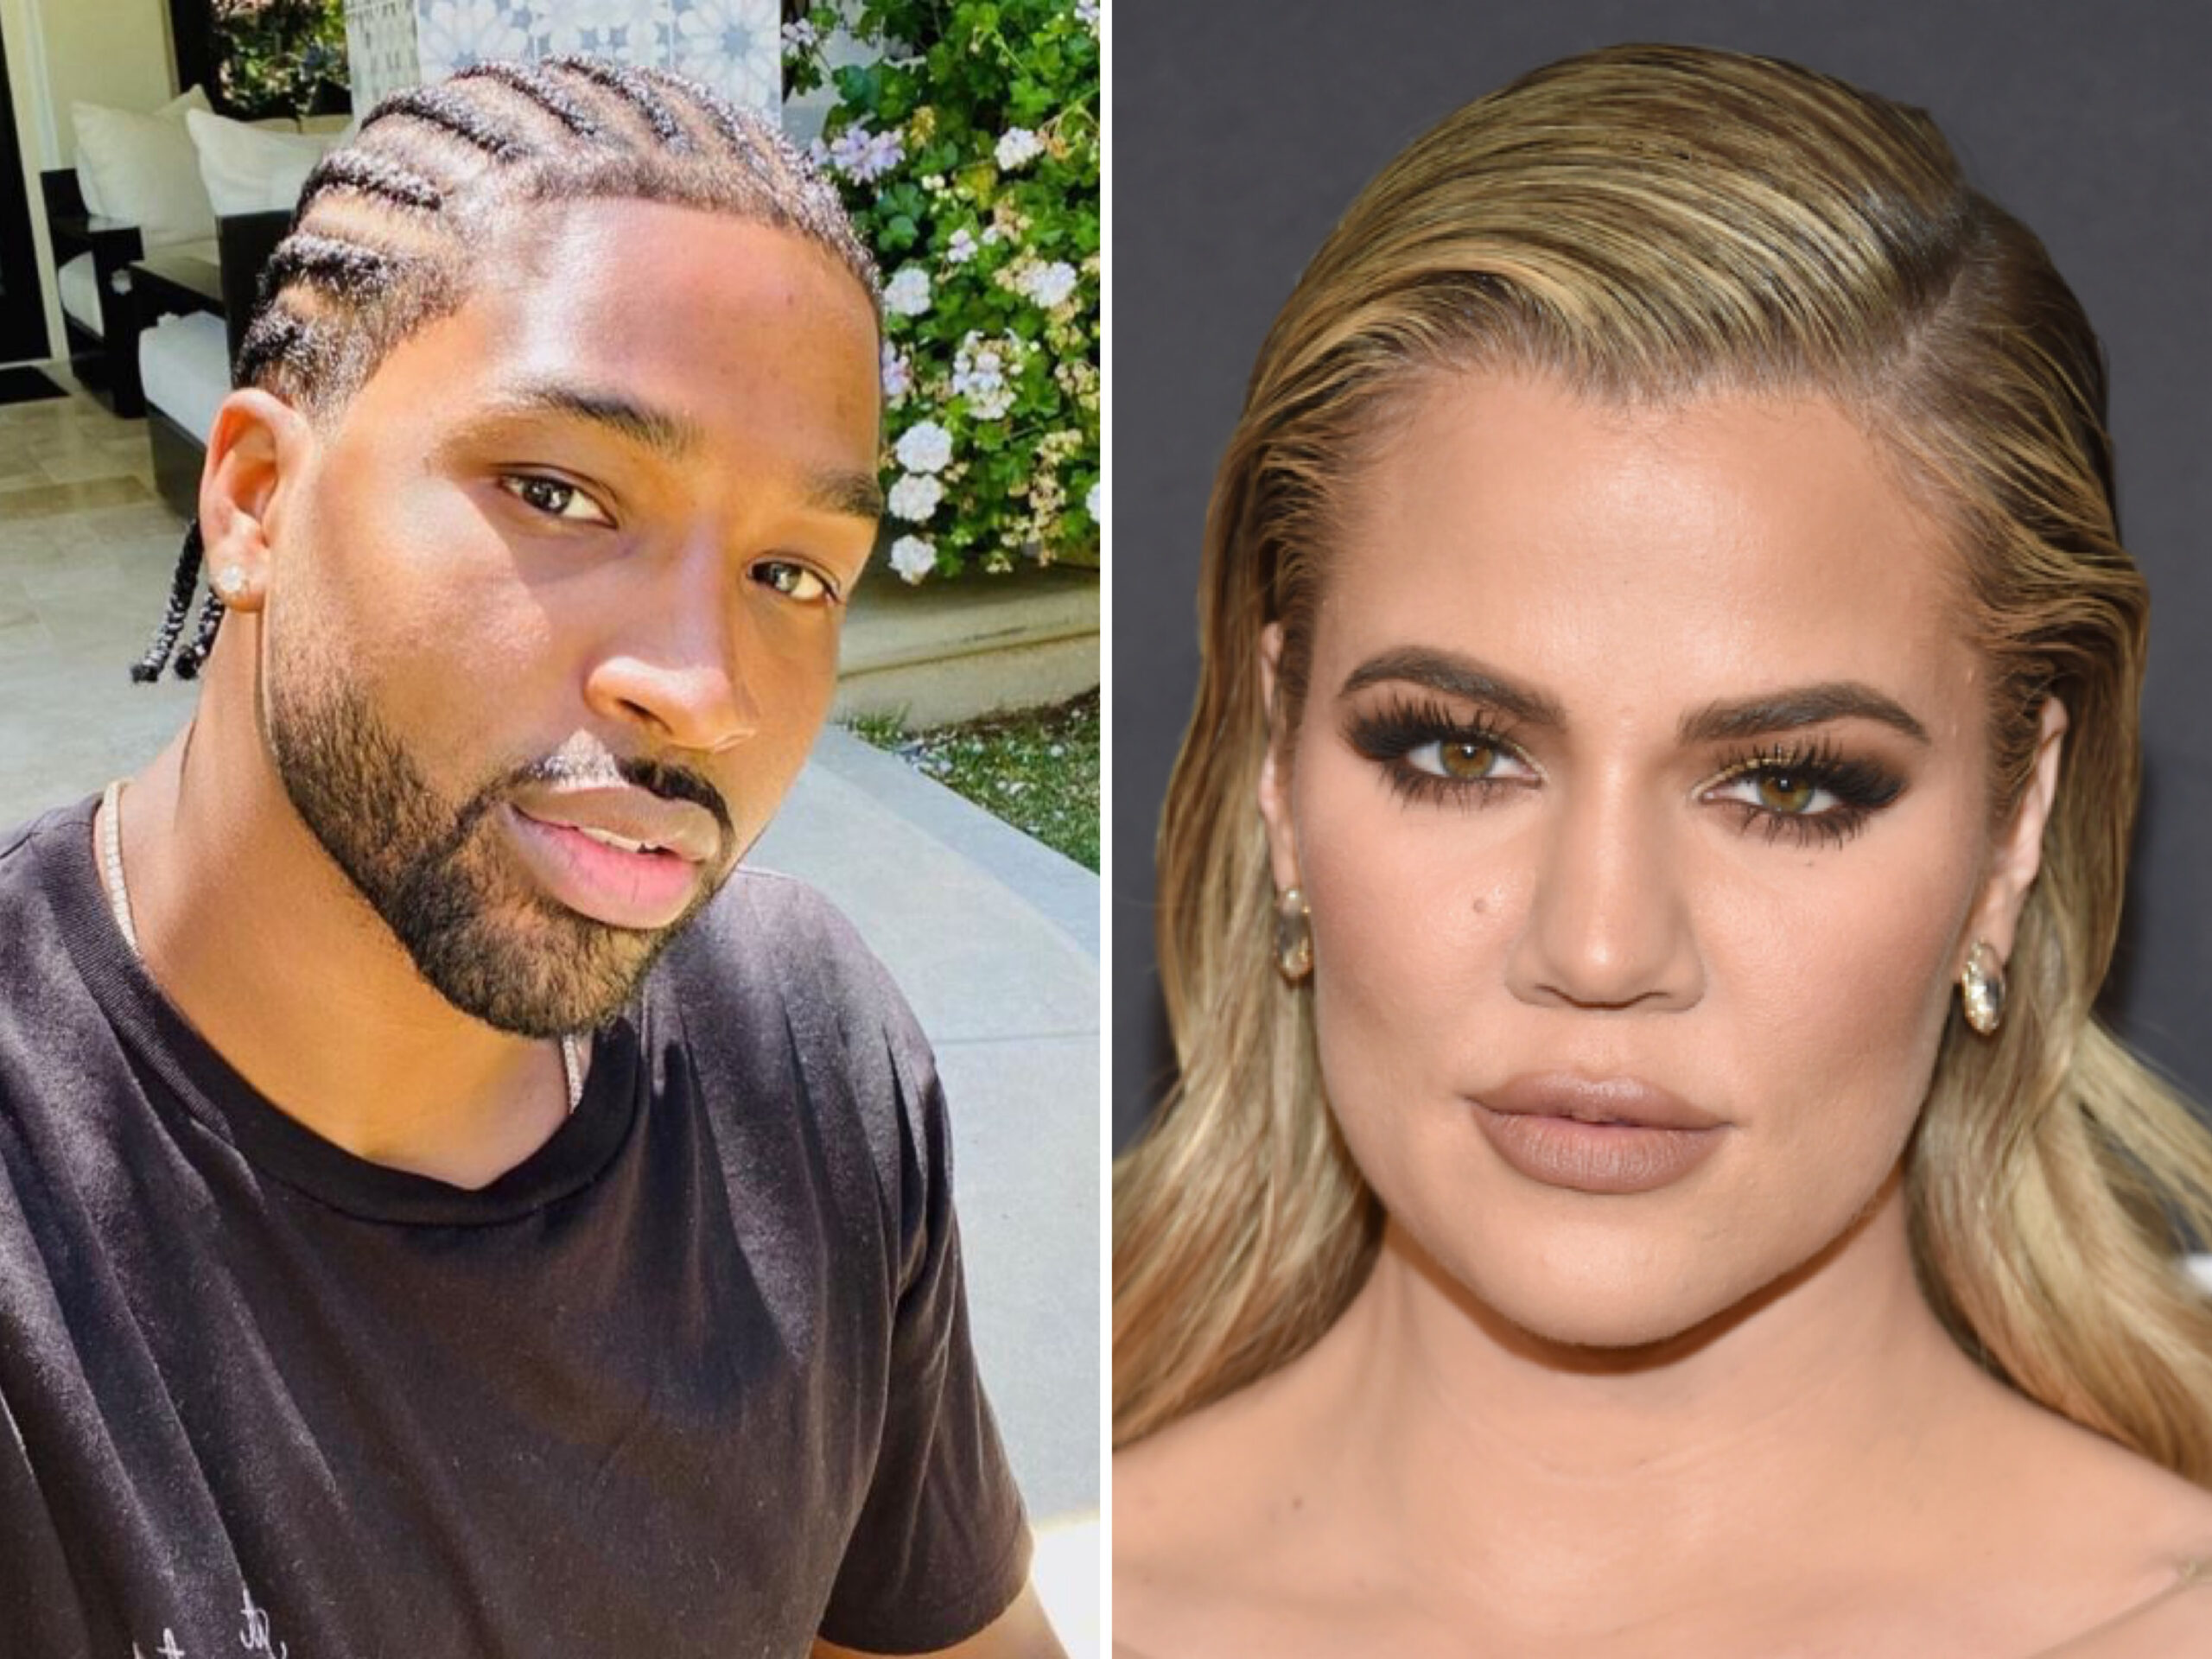 Tristan Thompson Apologises To Khloe Kardashian After Paternity Test Confirms He Fathered Child With Maralee Nichols